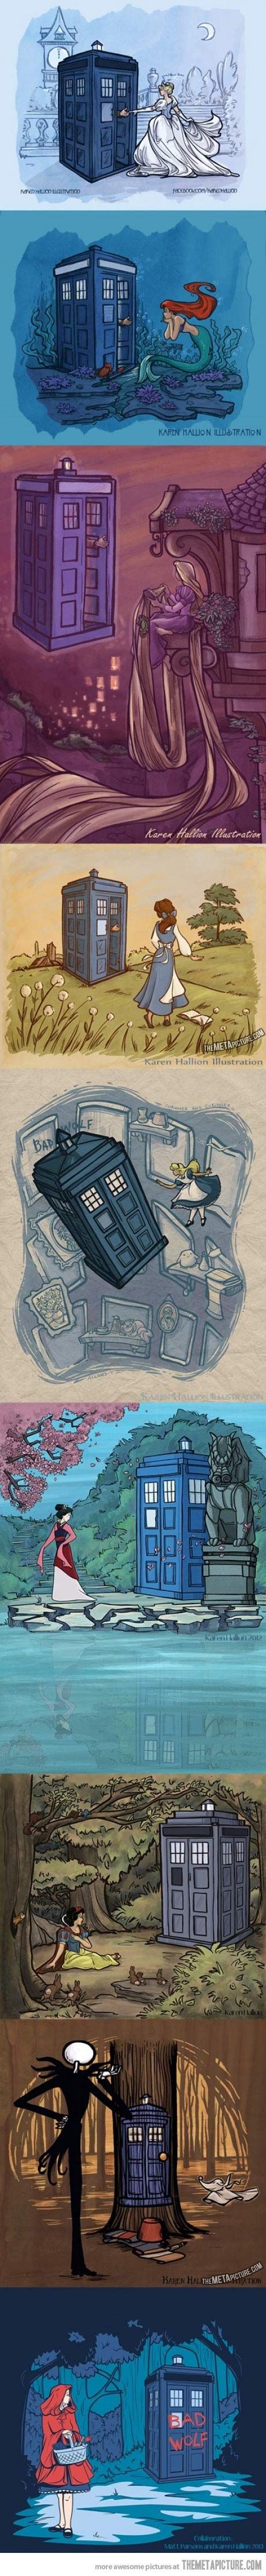 The TARDIS makes every movie better…I love the Bad Wolf reference.